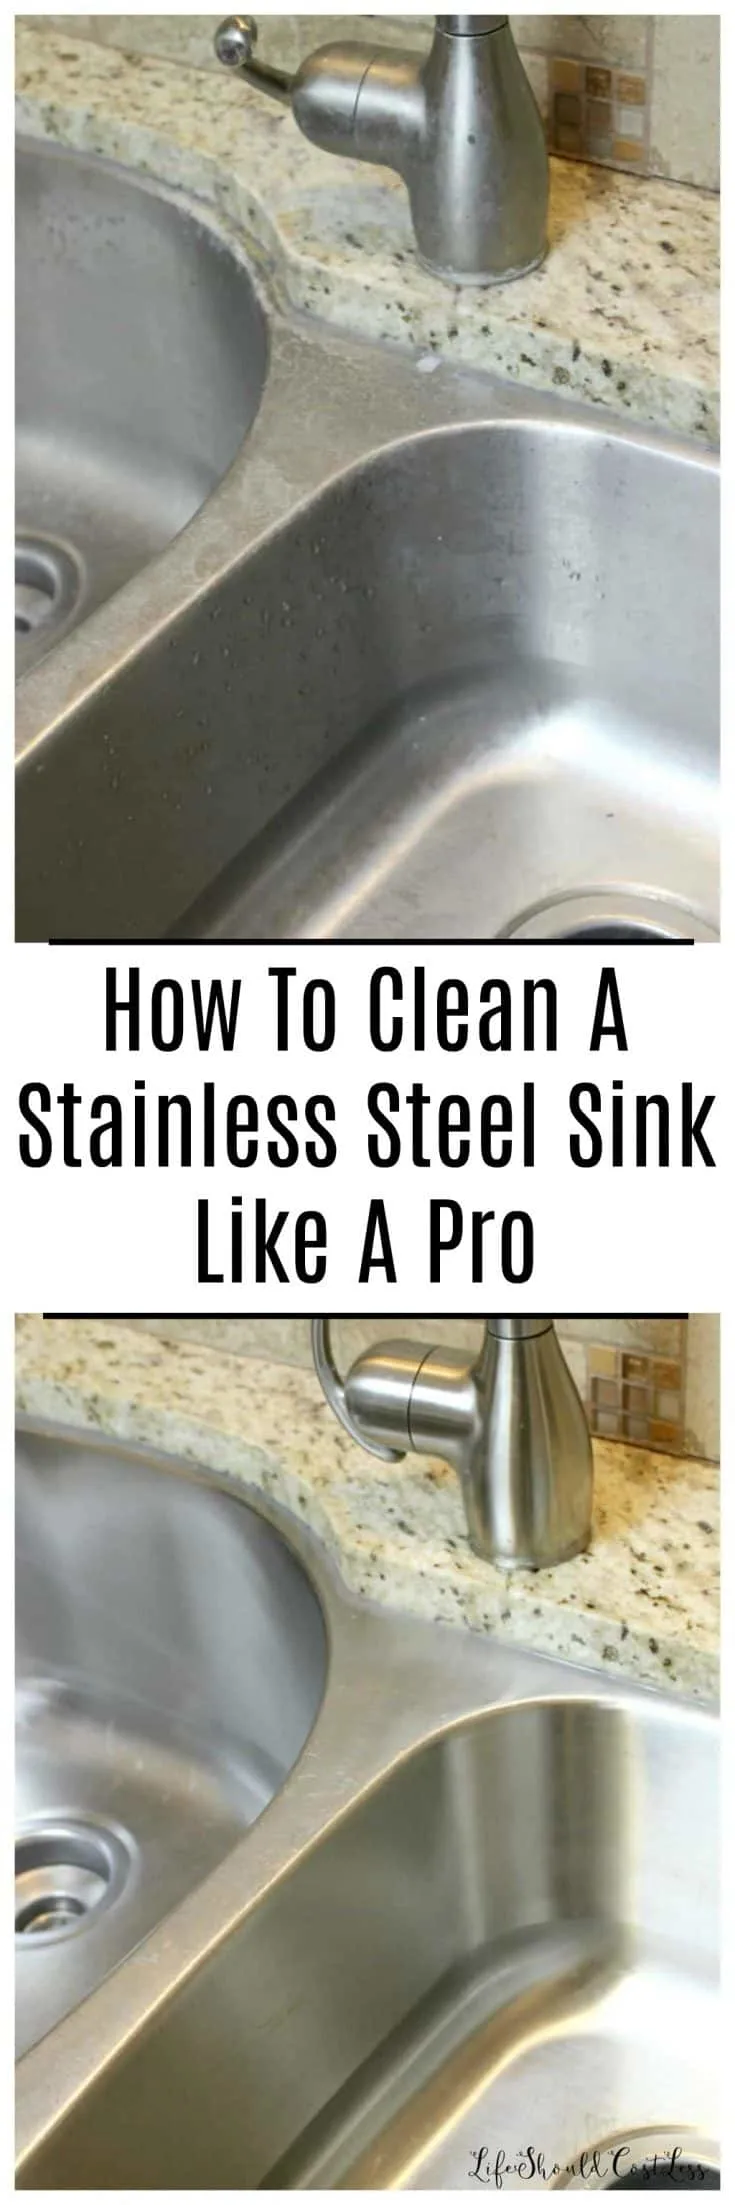 https://lifeshouldcostless.com/wp-content/uploads/2018/08/How-To-Clean-A-Stainless-Steel-Sink-Like-a-Professional.-lifeshouldcostless.com_-735x2205.jpg.webp